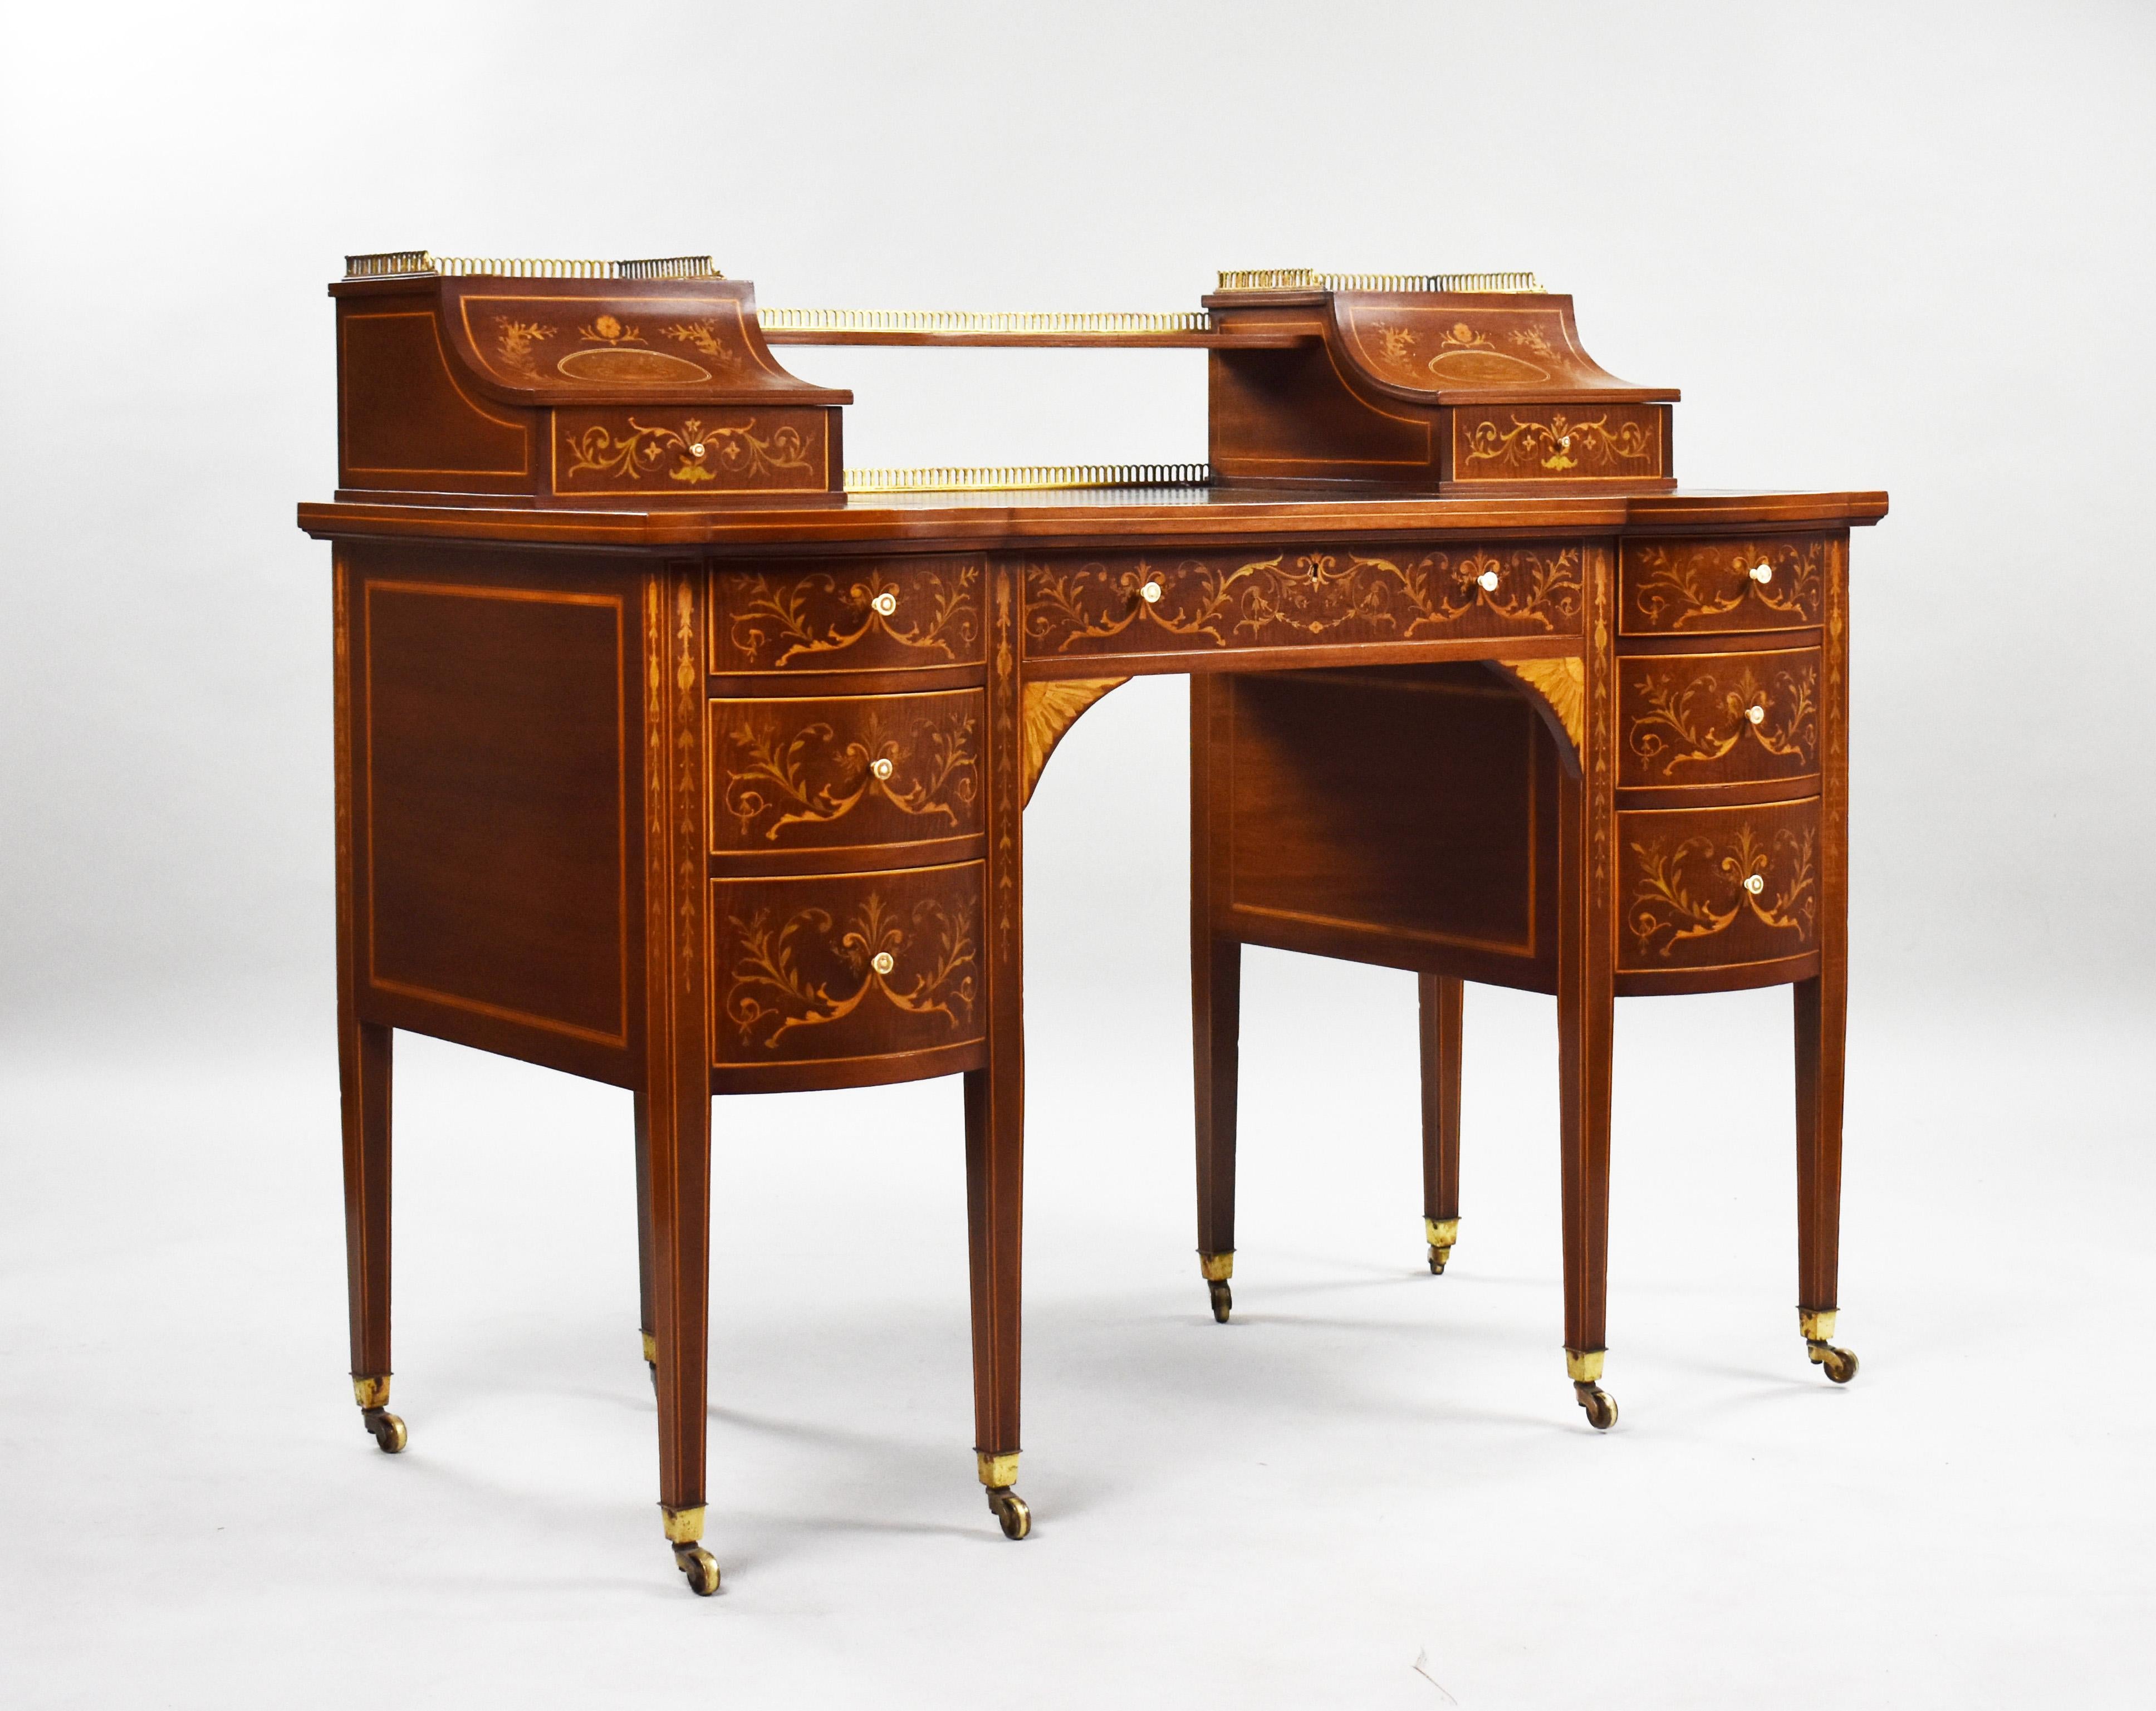 For sale is a top quality Victorian Sheraton revival marquetry inlaid carlton house desk attributed to Edwards & Roberts. The top having to marquetry inlaid boxes above single drawers flanked a hand coloured leather skiver decorated with gold